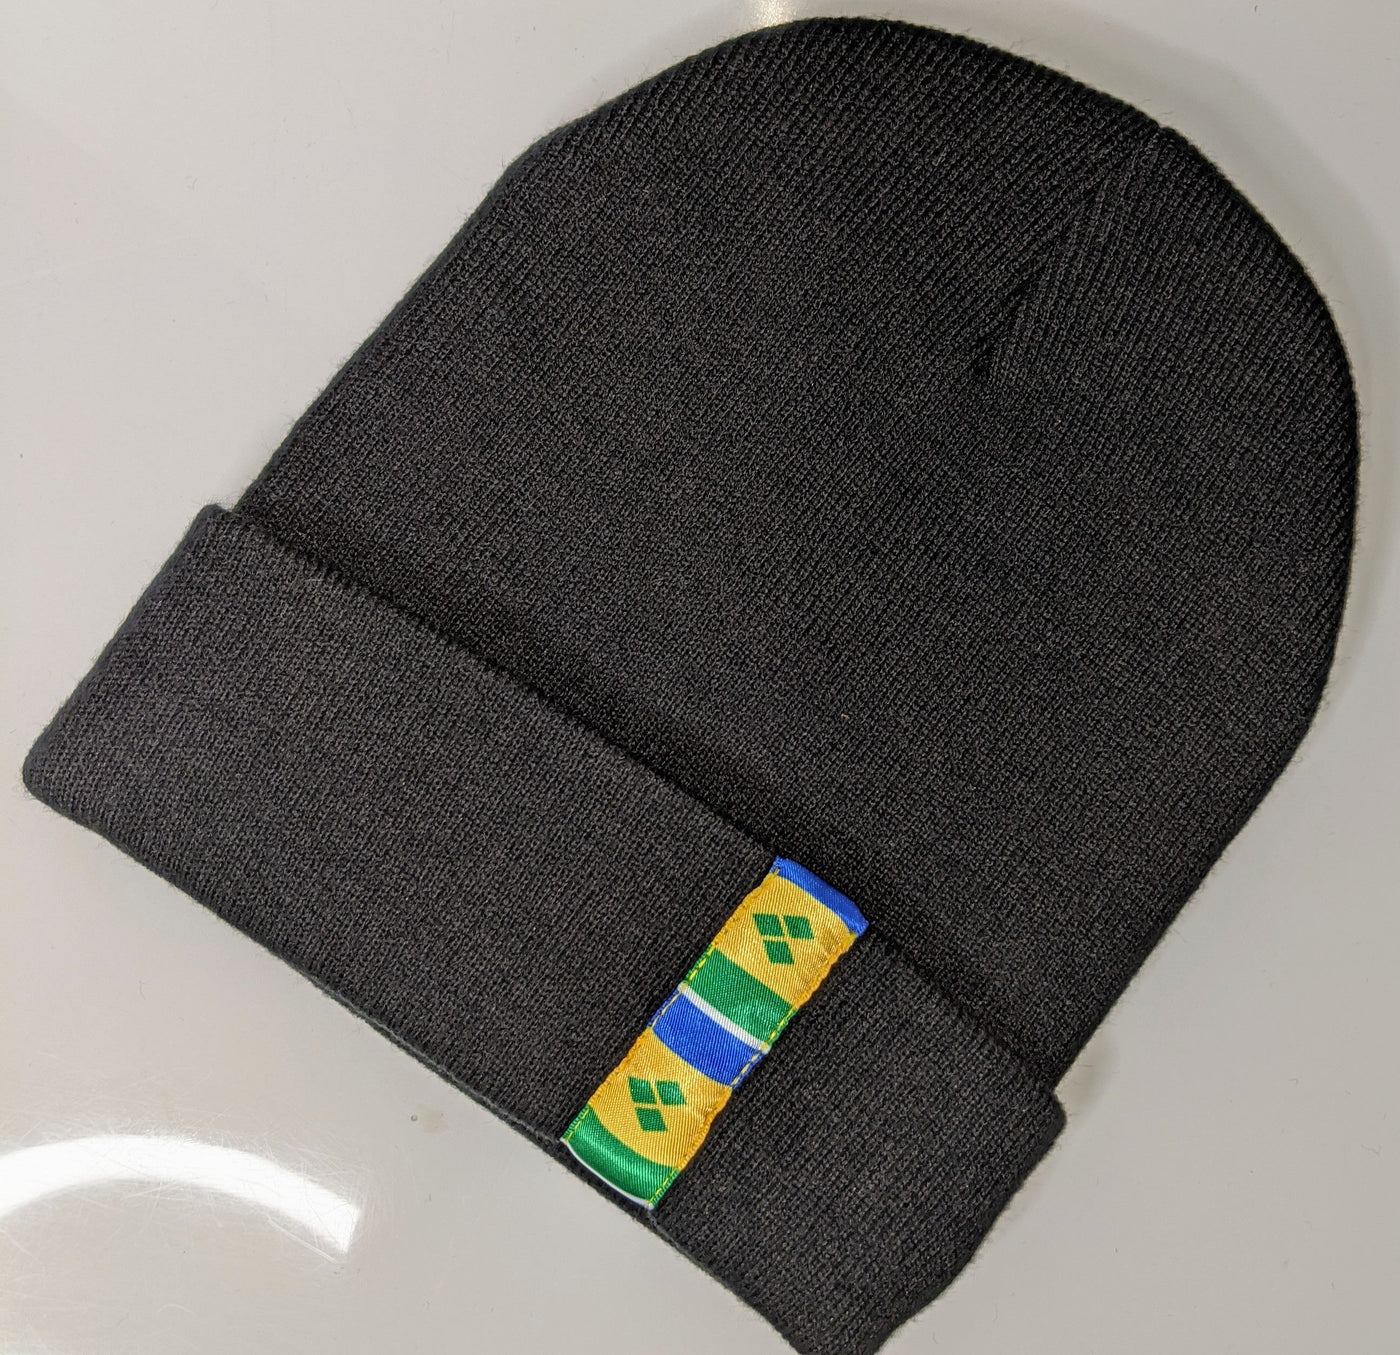 Hat and Sock set with flag detail